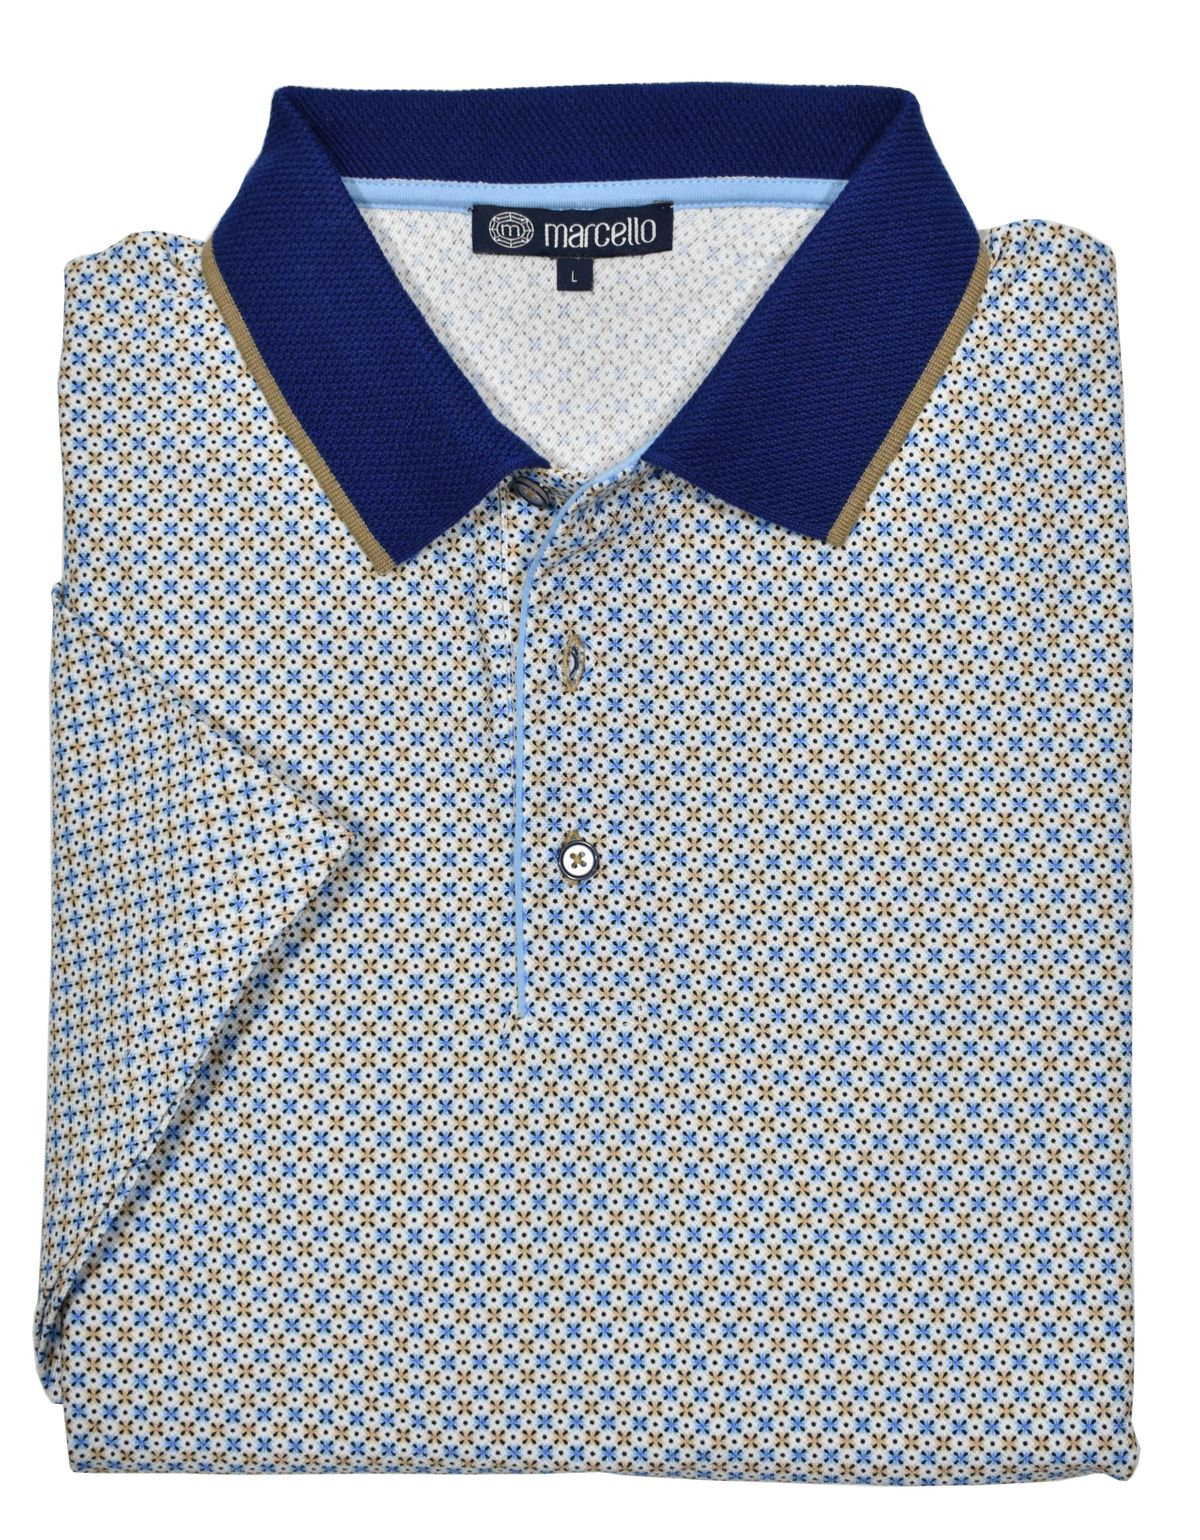 This ultra soft cotton pique polo looks timeless and feels lightweight. Its fine circular  print blue and tan pattern, contrast trim fabric, open sleeves and custom buttons make it unique and stylish. Enjoy its classic fit and timeless look.